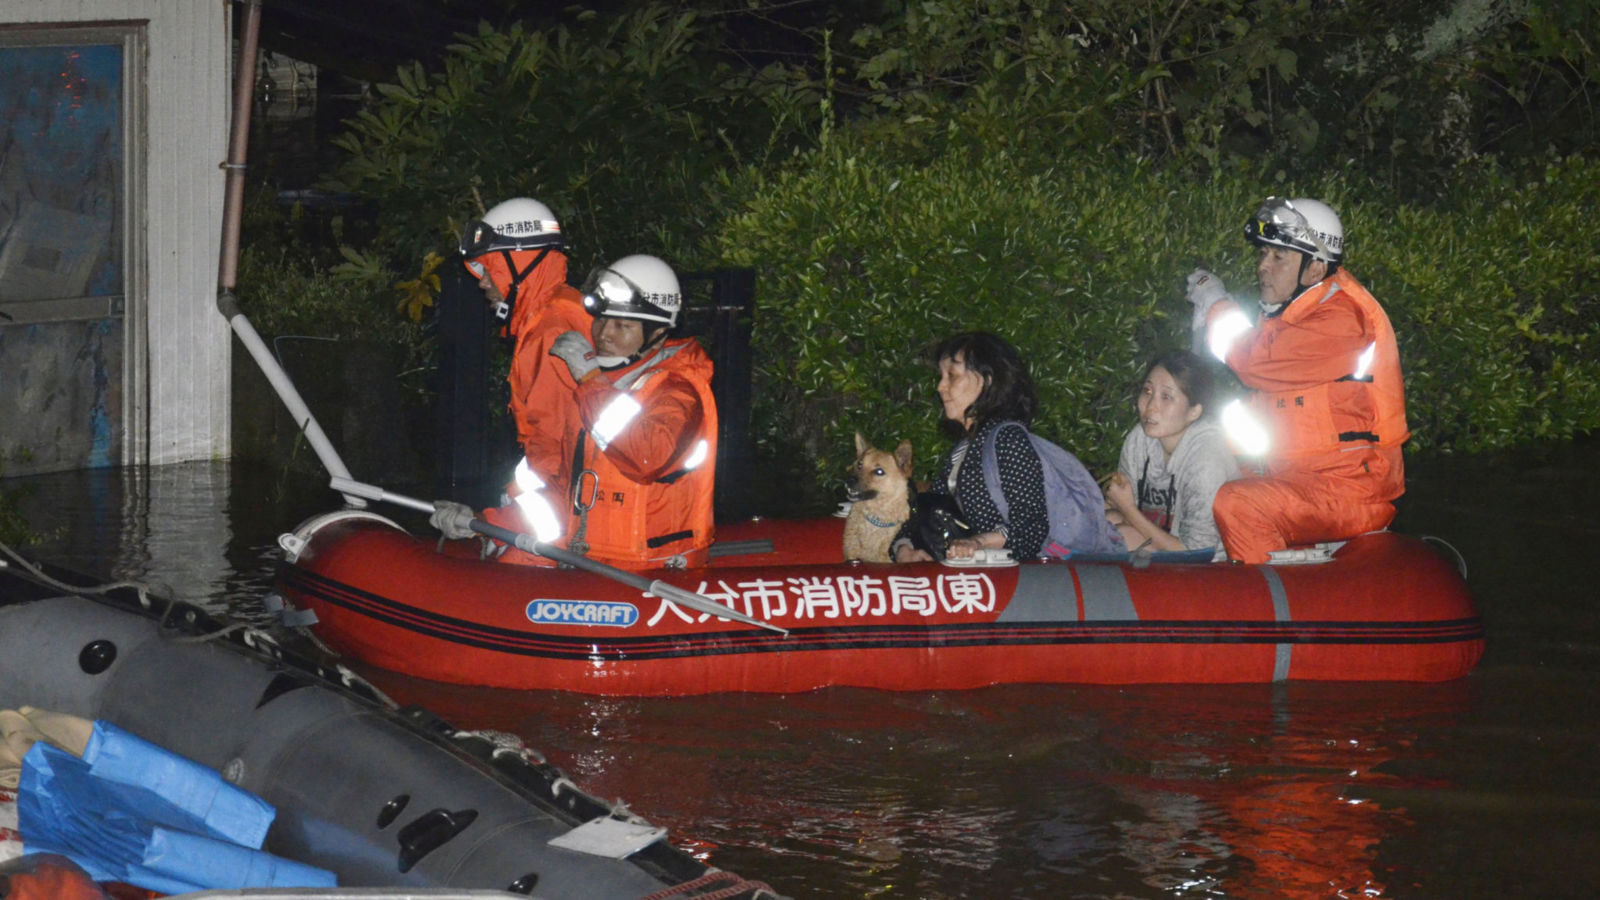 Residents are evacuated from their home in Oita, Japan after heavy rainfall